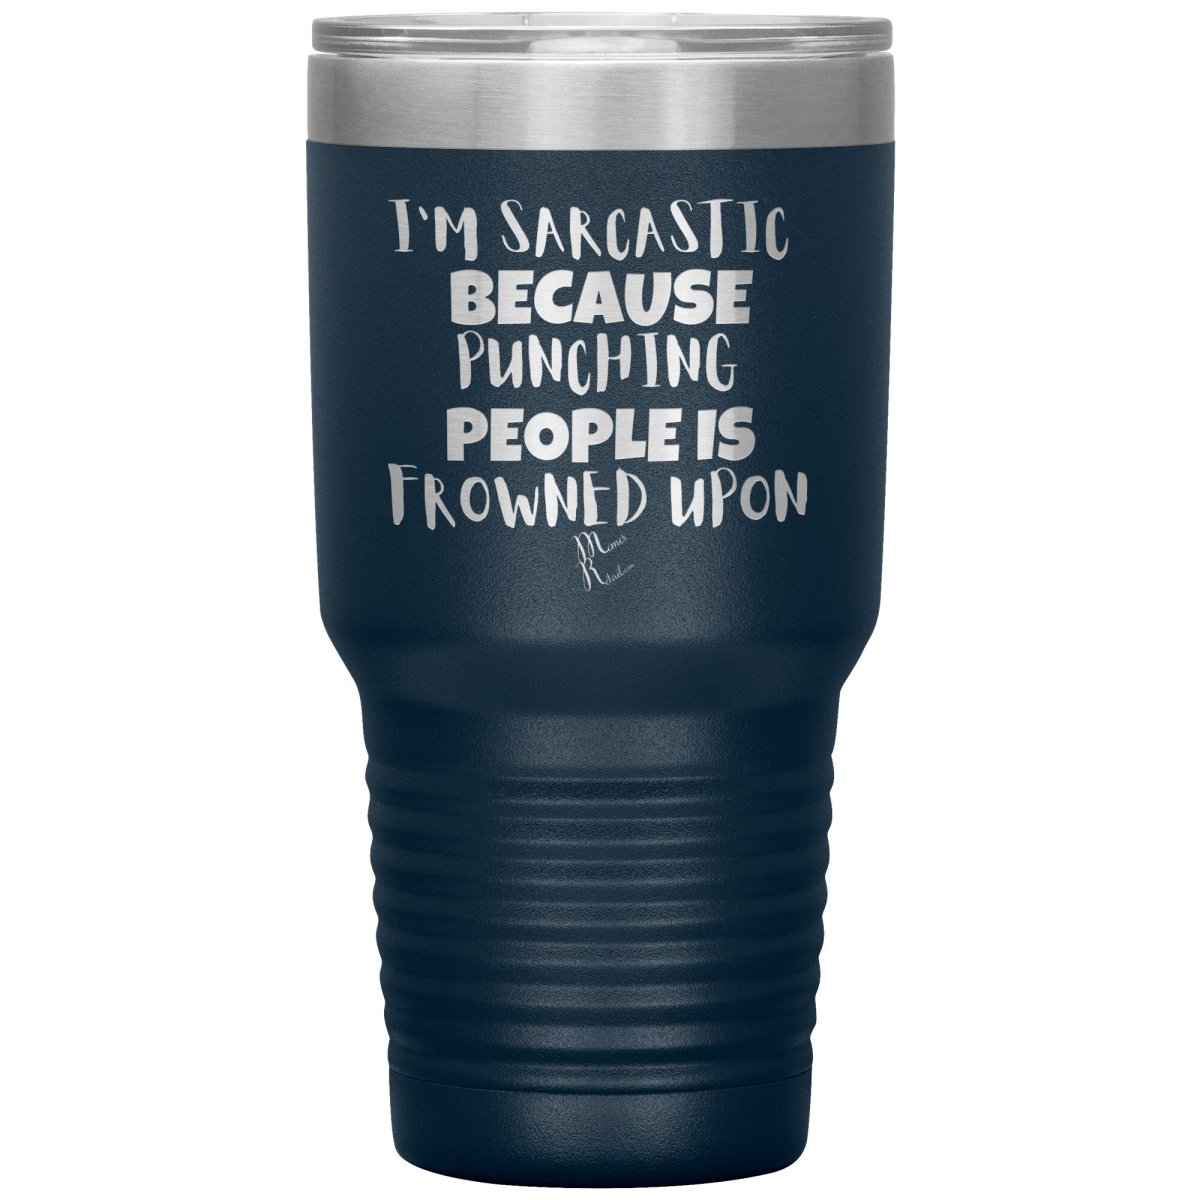 I'm Sarcastic Because Punching People is Frowned Upon Tumblers, 30oz Insulated Tumbler / Navy - MemesRetail.com